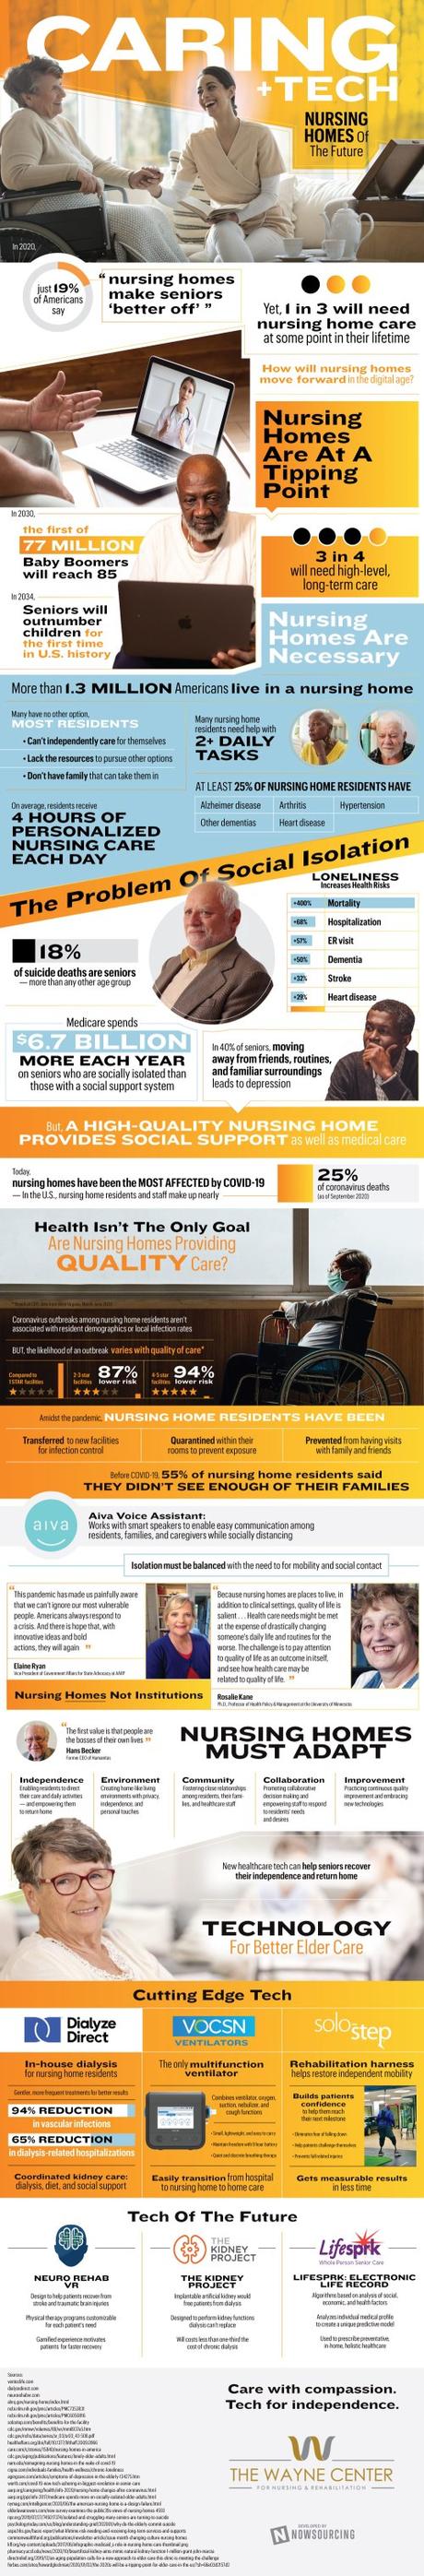 Caring + Tech: Nursing Homes Of The Future